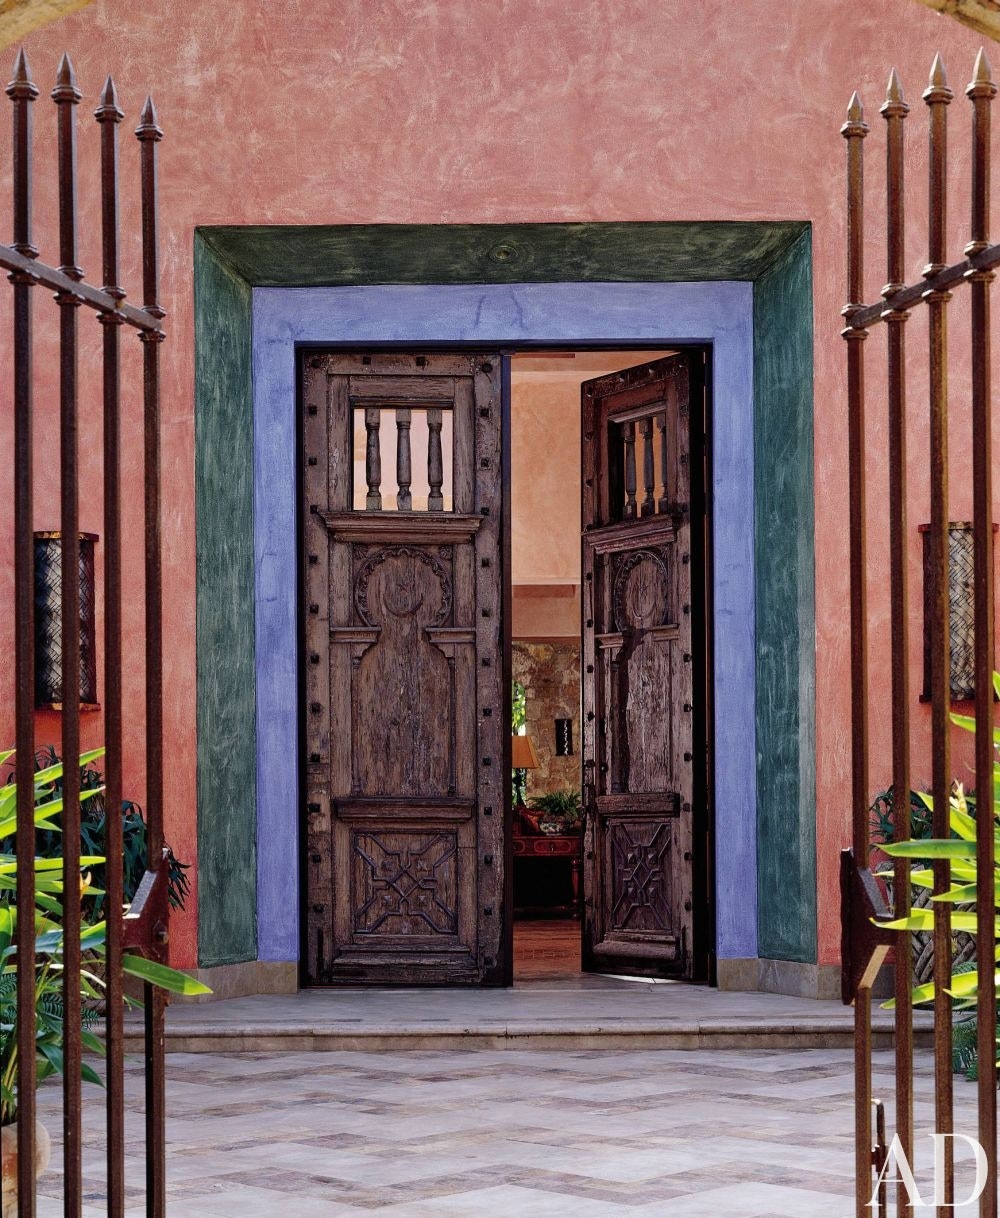 hand painted ceramic tiles from Mexico decorating the house entrance